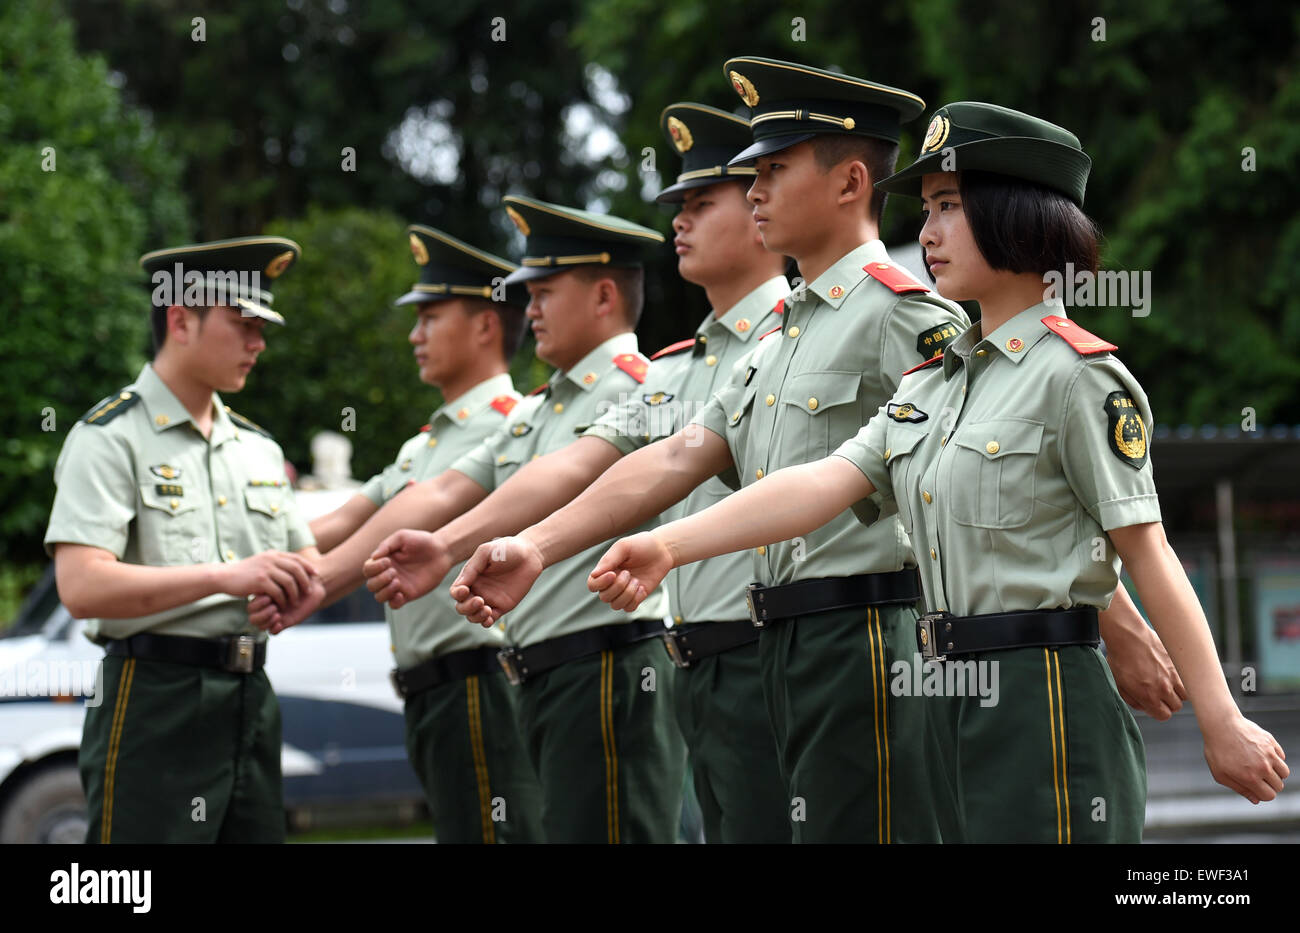 (150625) -- DEHONG, June 25, 2015 (Xinhua) -- Zhang Liu (1st R) and her comrades are trained at the border checkpoint of Mukang in Dehong Dai-Jingpo Autonomous Prefecture, southwest China's Yunnan Province, June 24, 2015. Born in 1995, Zhang Liu became an anti-drug soldier in border checkpoint of Mukang in 2013.  Grown up in an affluent family in central China's Hunan Province, Zhang said that being a soldier had always been her dream, which drove her to join the army after graduating from high school. Being a front line anti-drug force, the border checkpoint of Mukang has captured about 100 k Stock Photo